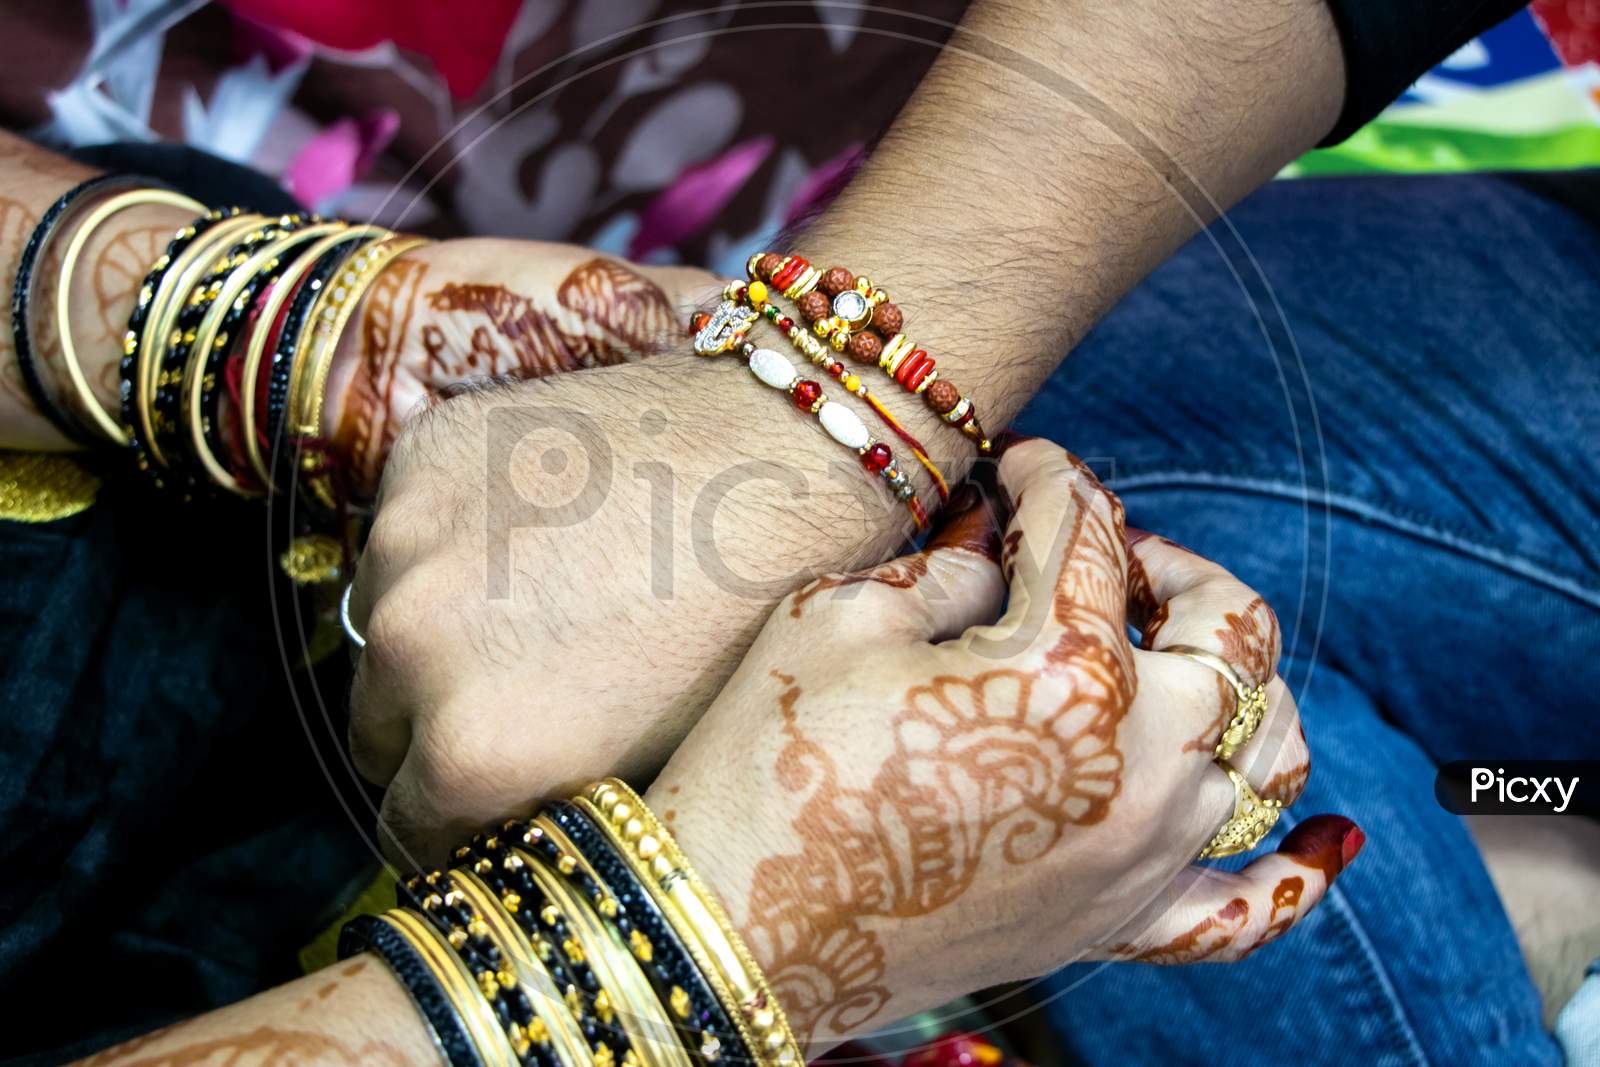 Image Of Rakshabandhan Celebrated In India As A Festival Denoting Brother Sister Love And